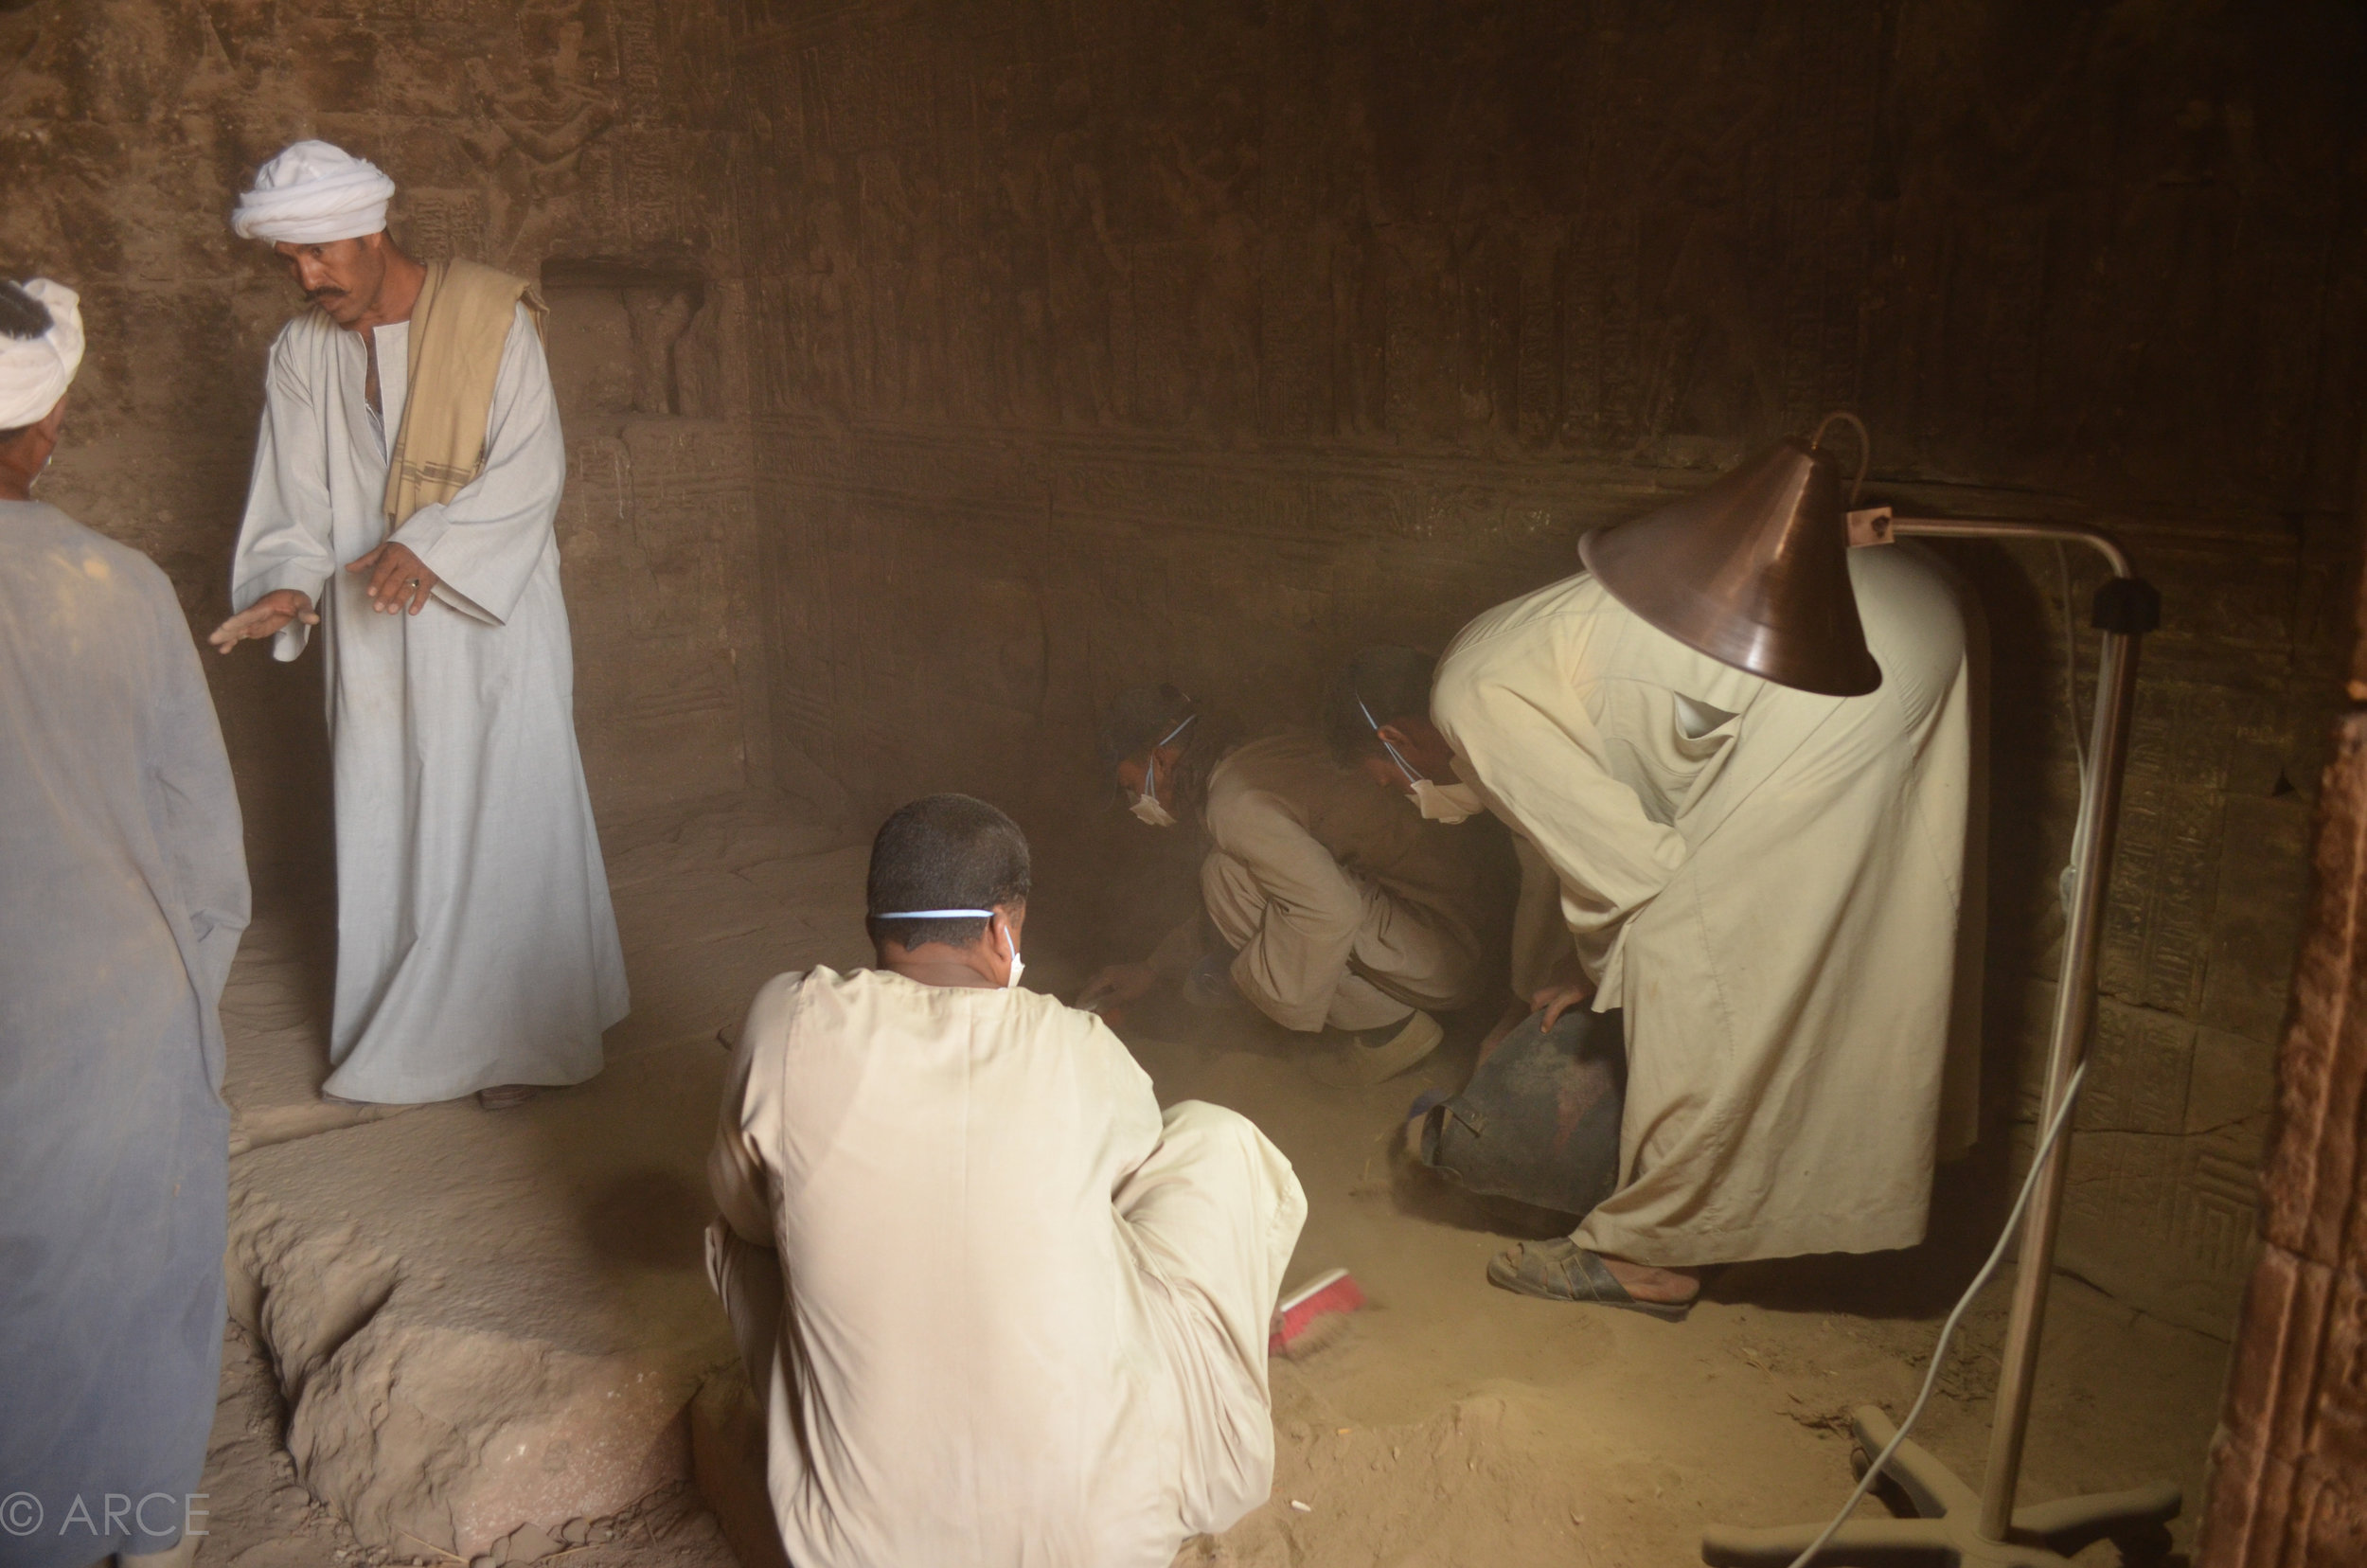  Once the bats had been permanently excluded, thick deposits of dust and guano were removed from the ﬂoors of the temple. All debris was reviewed for archaeological material before disposal.&nbsp;  Image © ARCE, 2012 